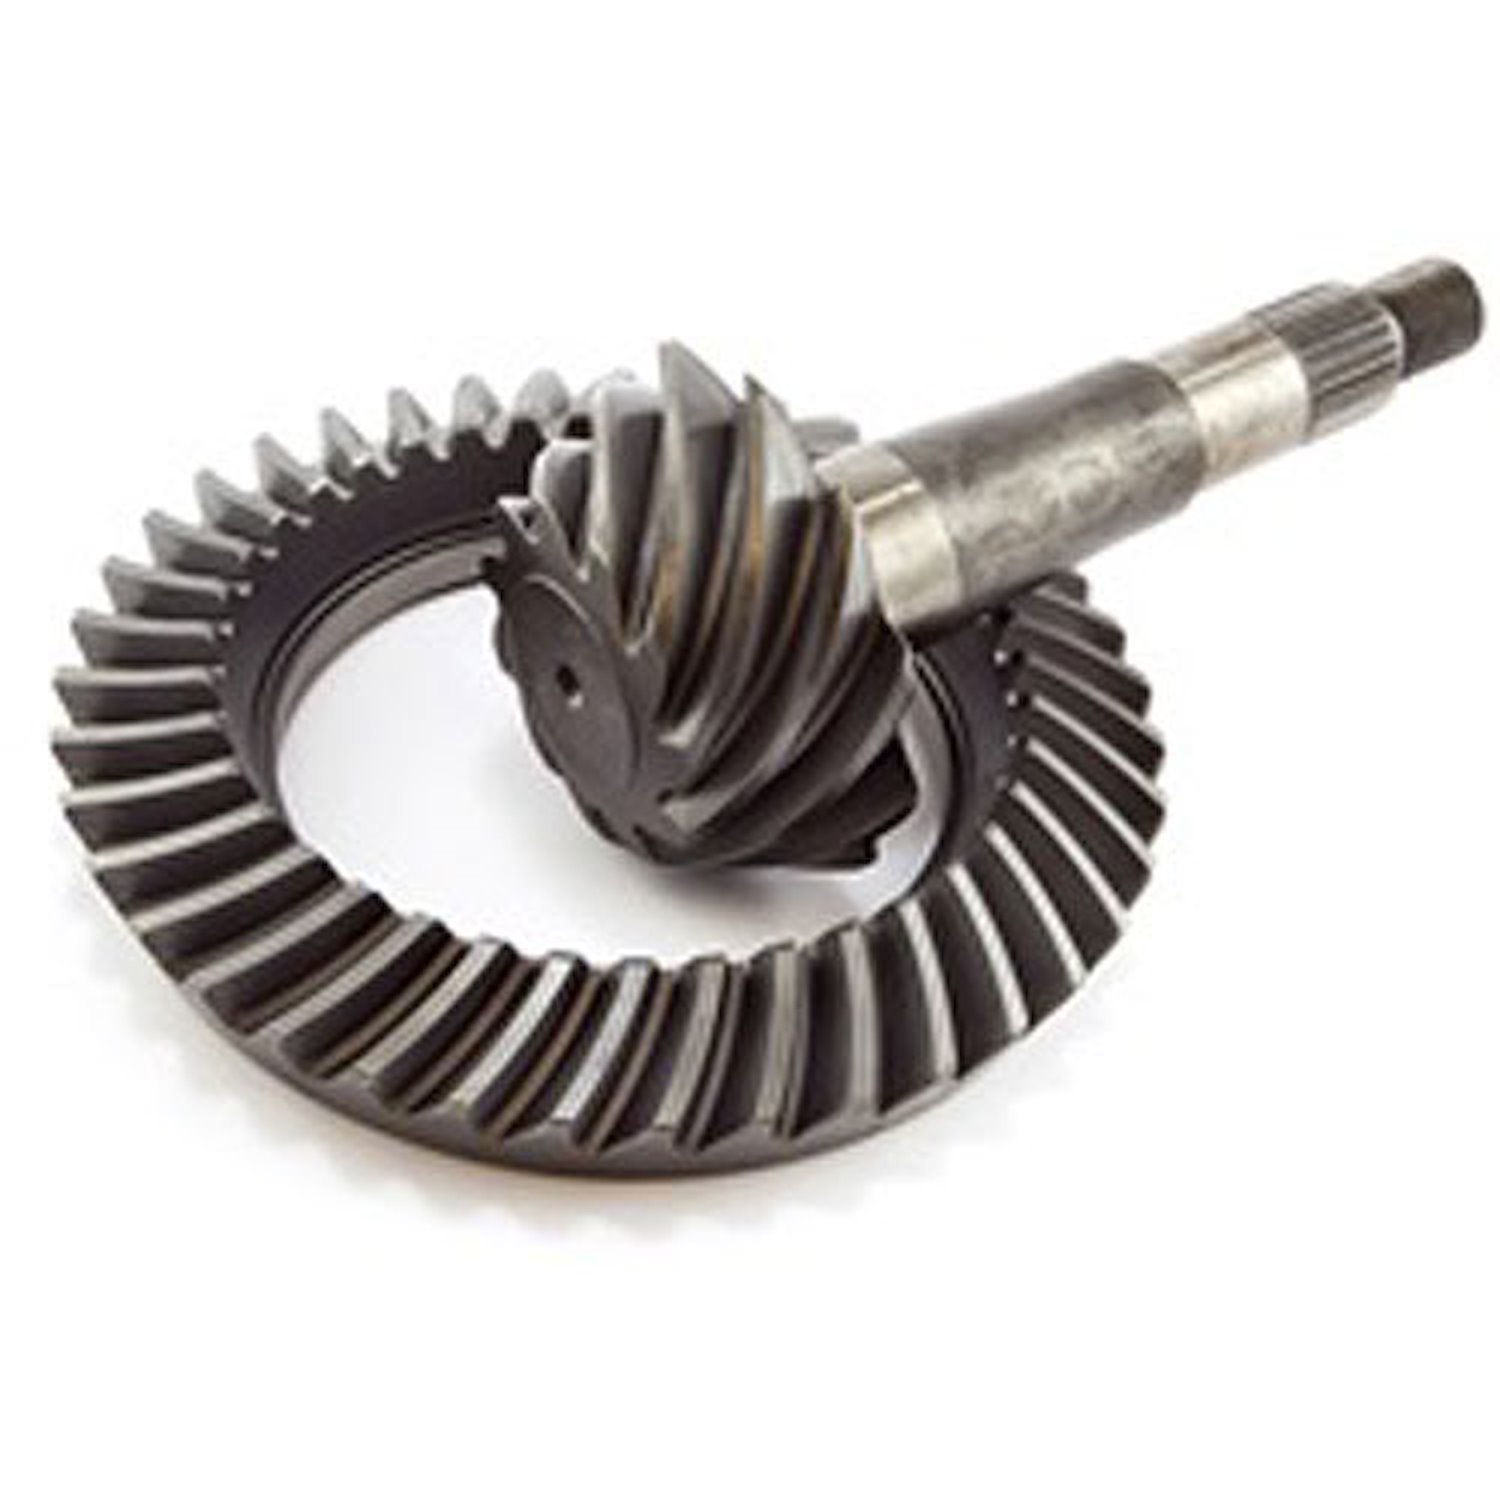 This 3.73 ring and pinion set from MOPAR for Dana 44 rear axle found in 08-16 Jeep Wranglers.